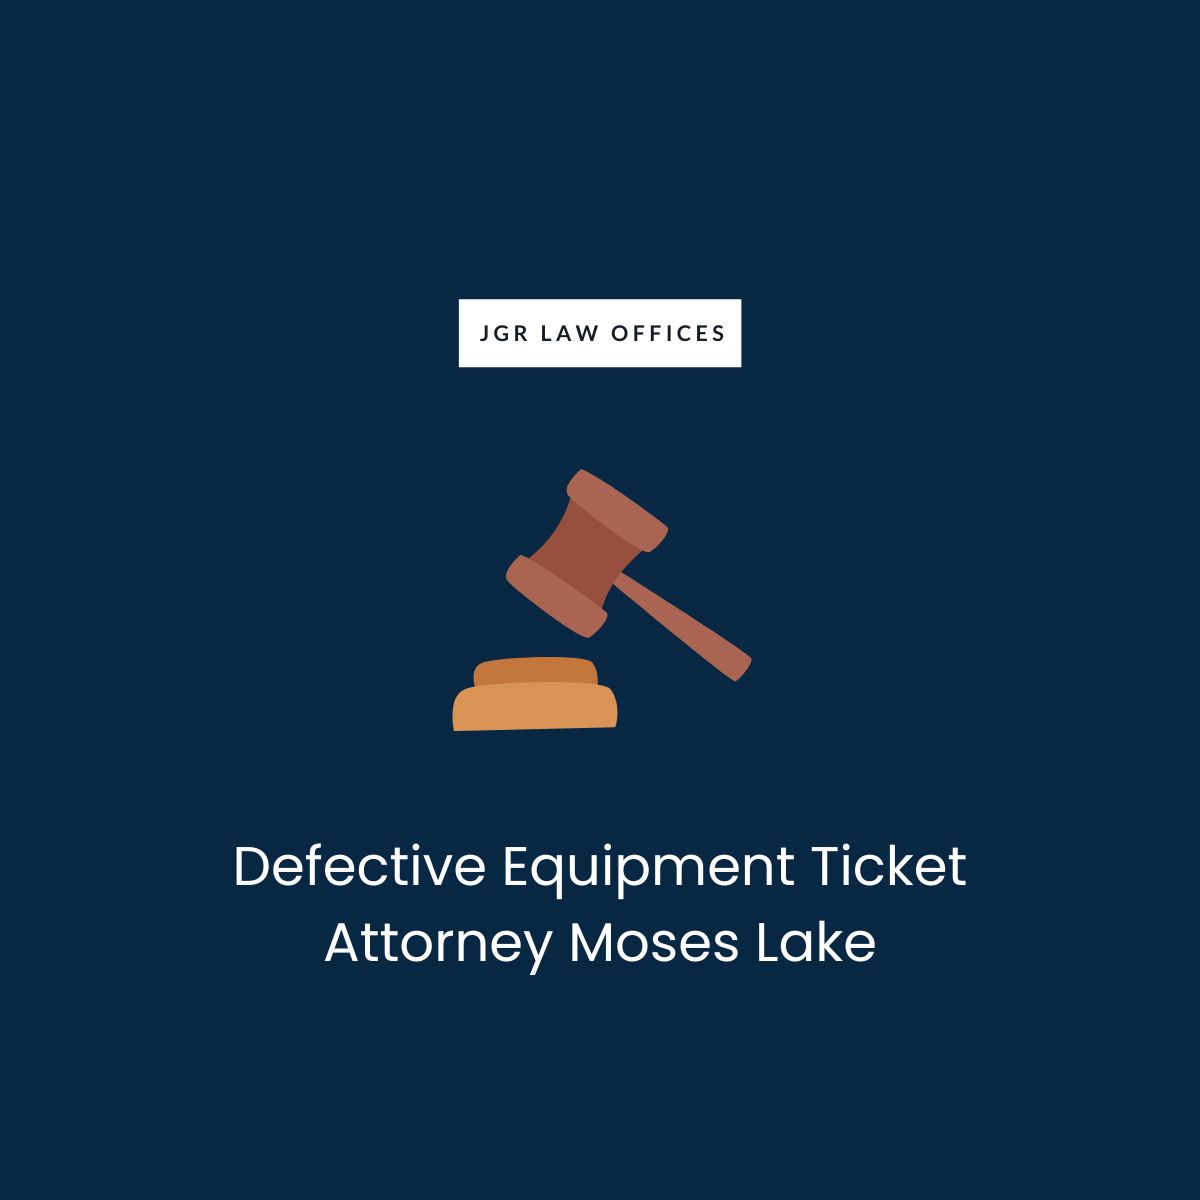 Defective Equipment Ticket Attorney Moses Lake